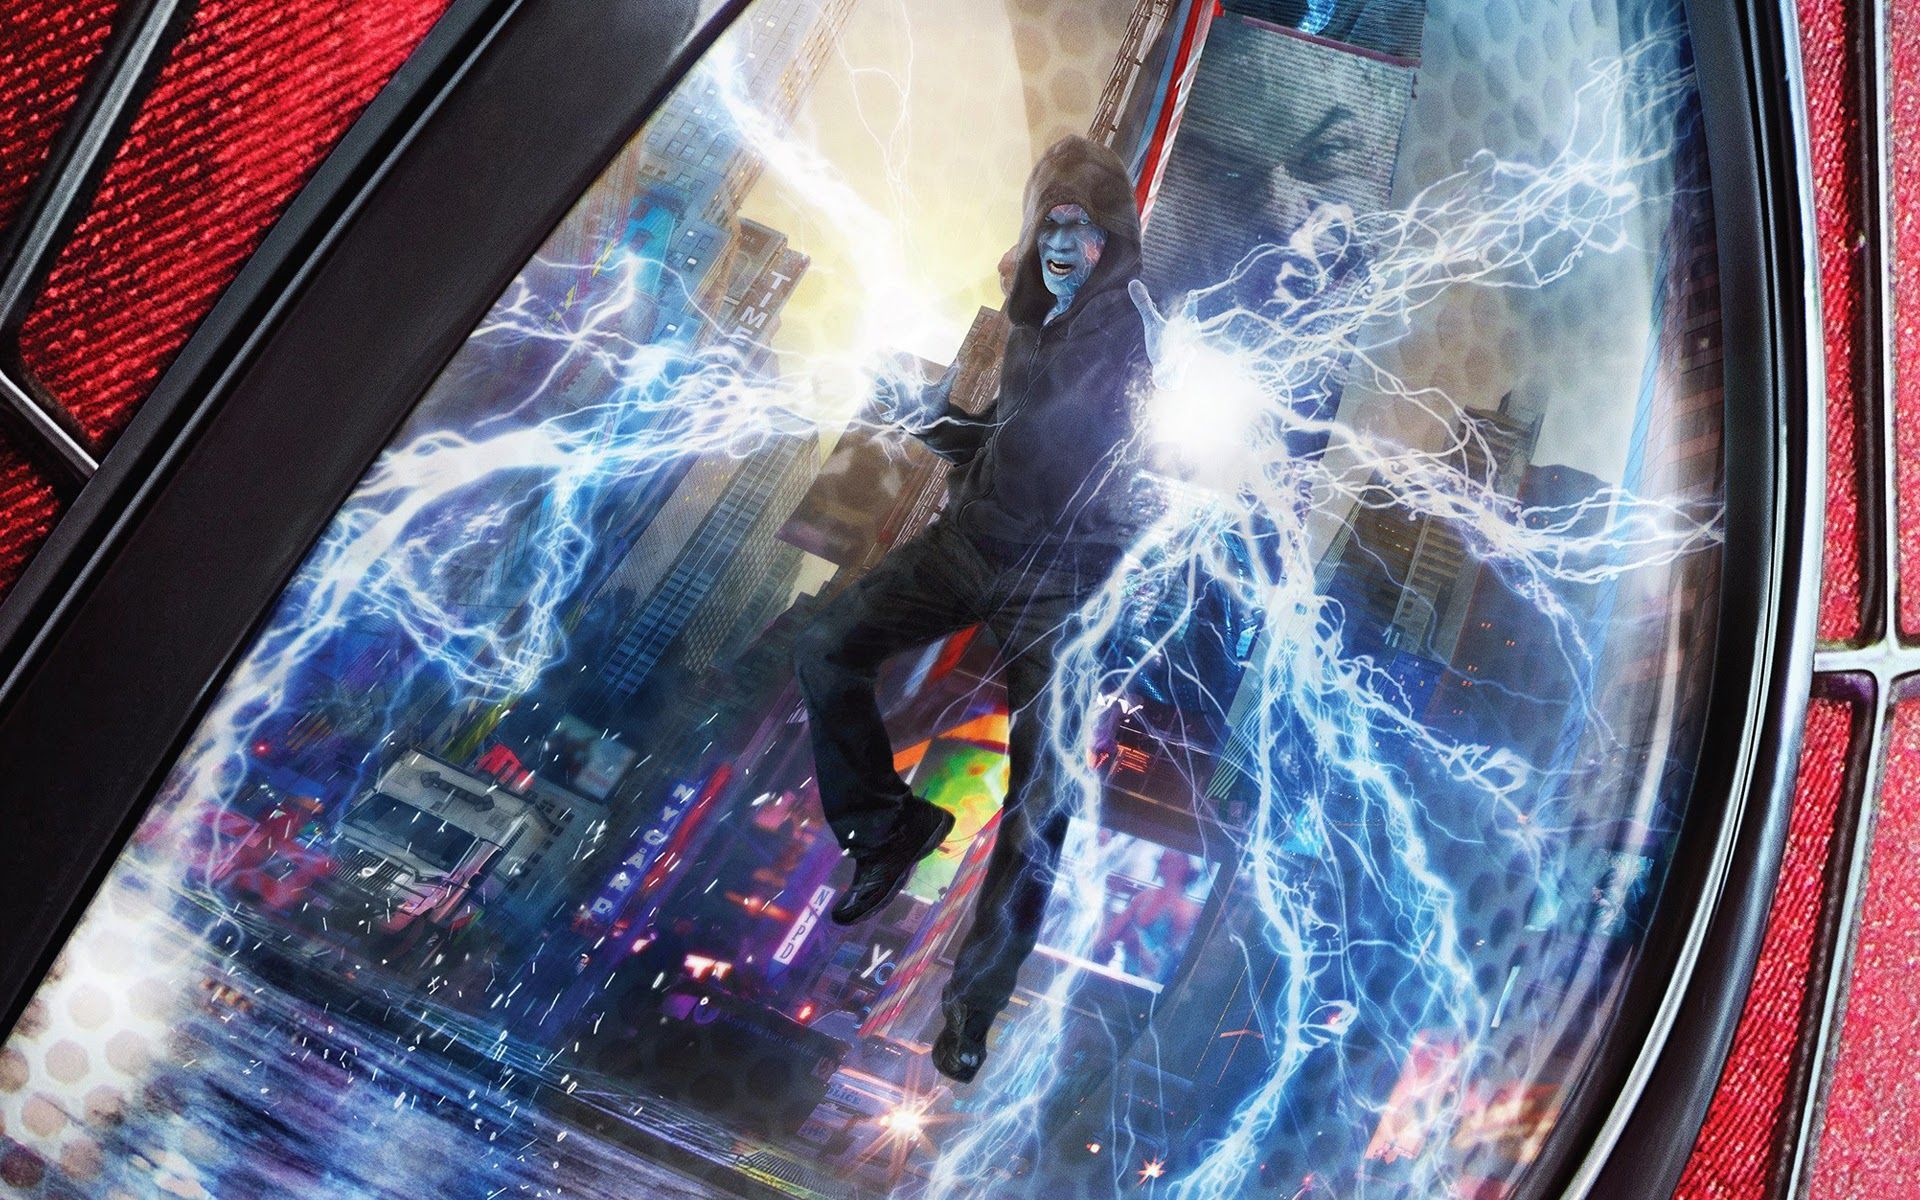 The Amazing Spider Man 2 Electro Poster Hd Wallpaper (JPEG Image, 1920 × 1200 Pixels) (. Amazing Spider, Amazing Spiderman Movie, Spiderman